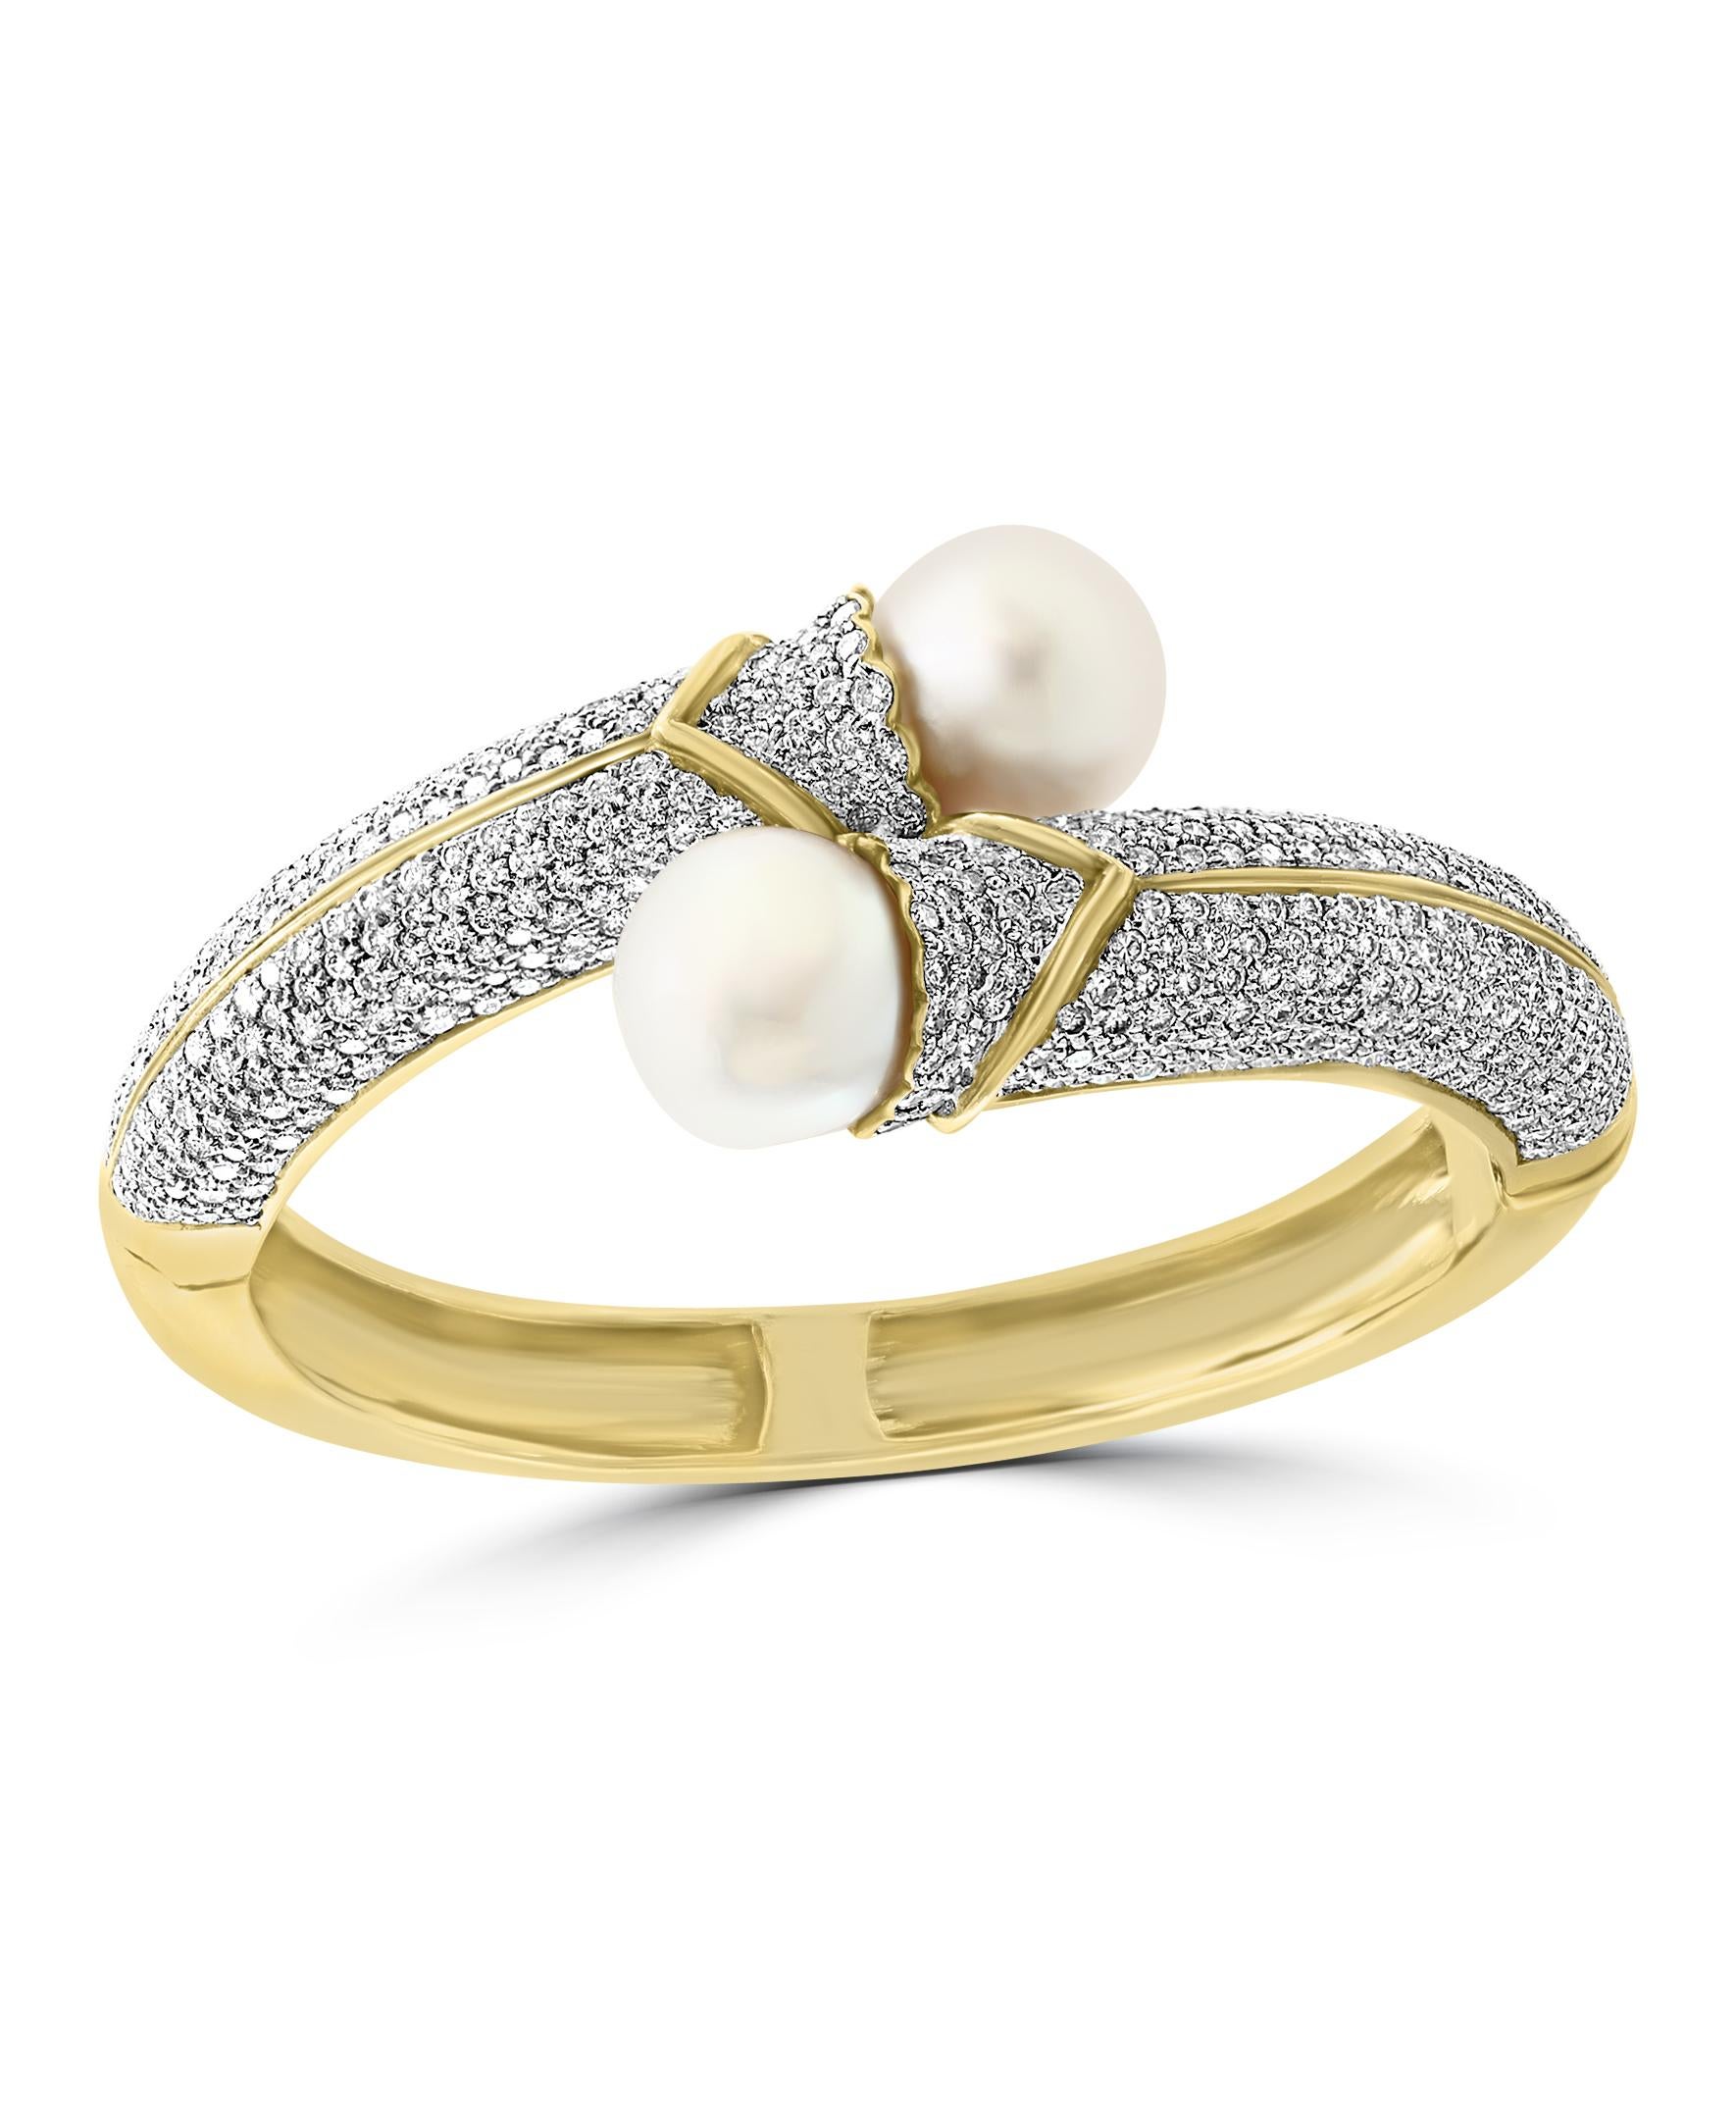 Round Cut South Sea Pearl and 8 Carat Diamond Bangle in 18 Karat Yellow Gold Estate For Sale